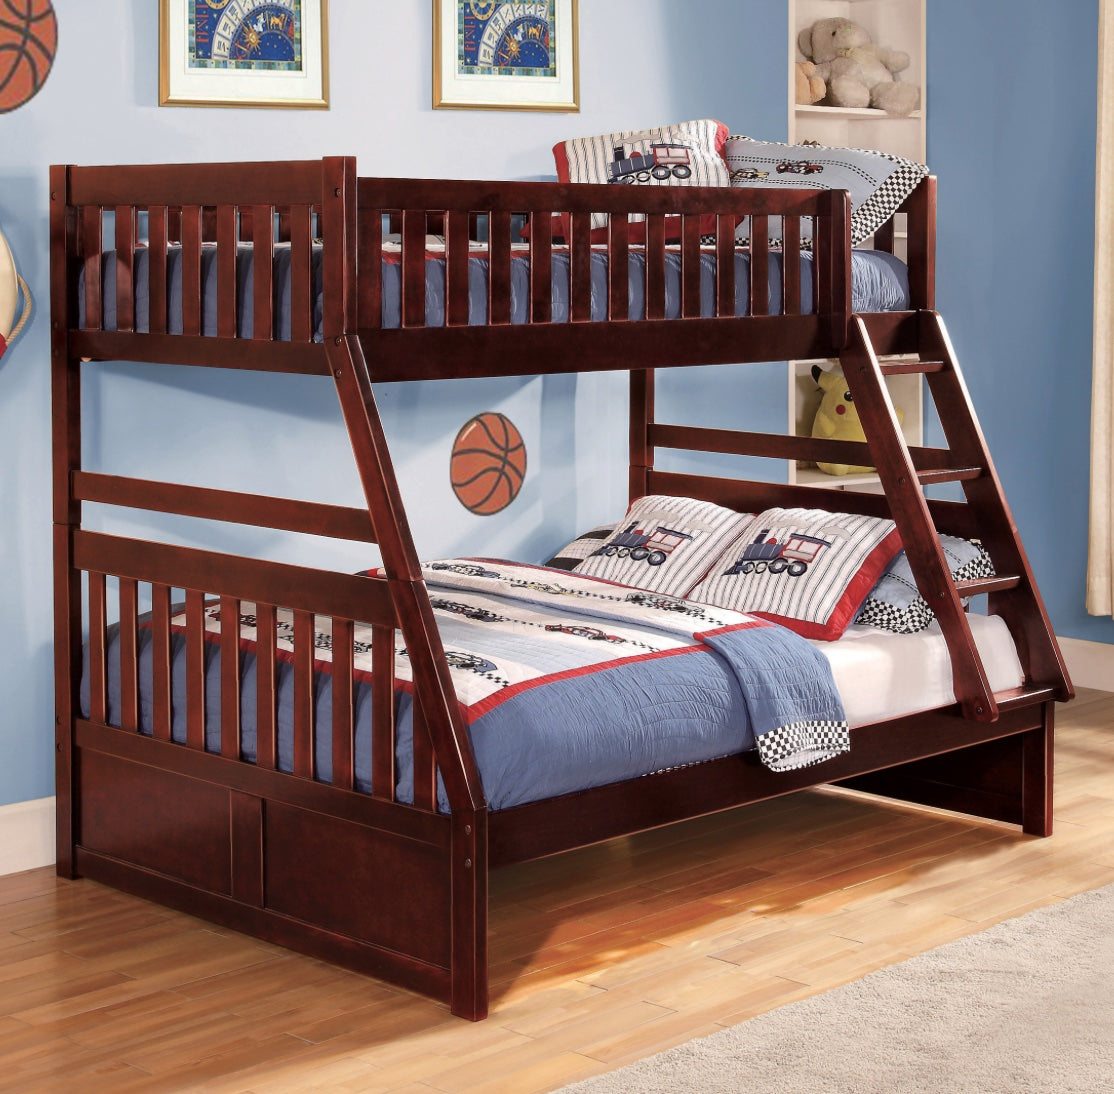 Youth Bedroom Sets